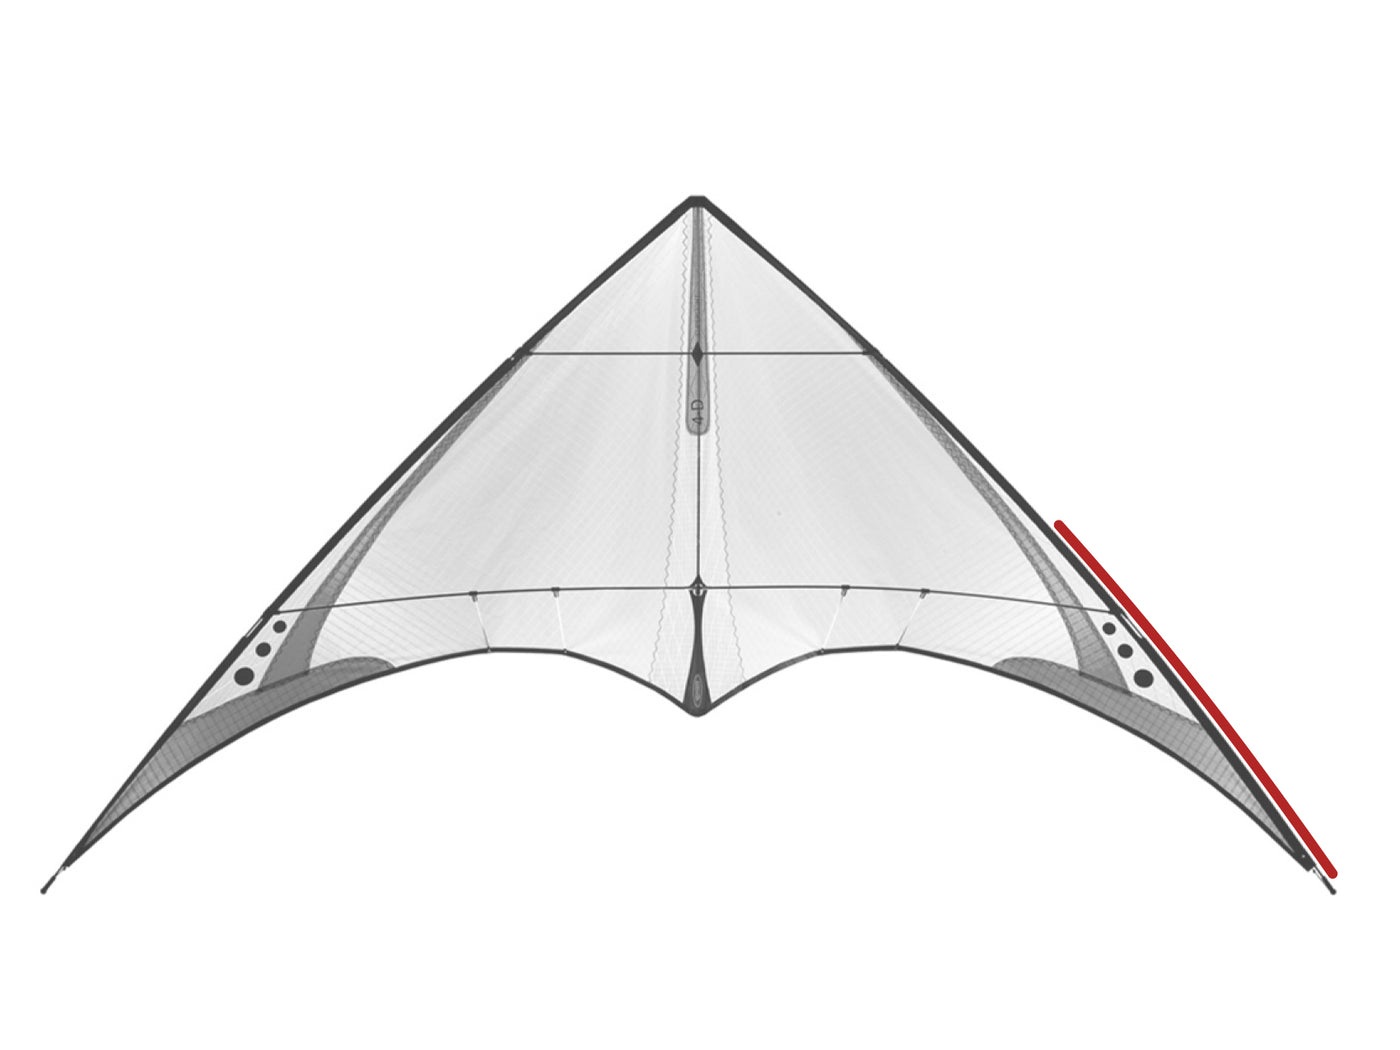 Diagram showing location of the 4-D Lower Leading Edge on the kite.